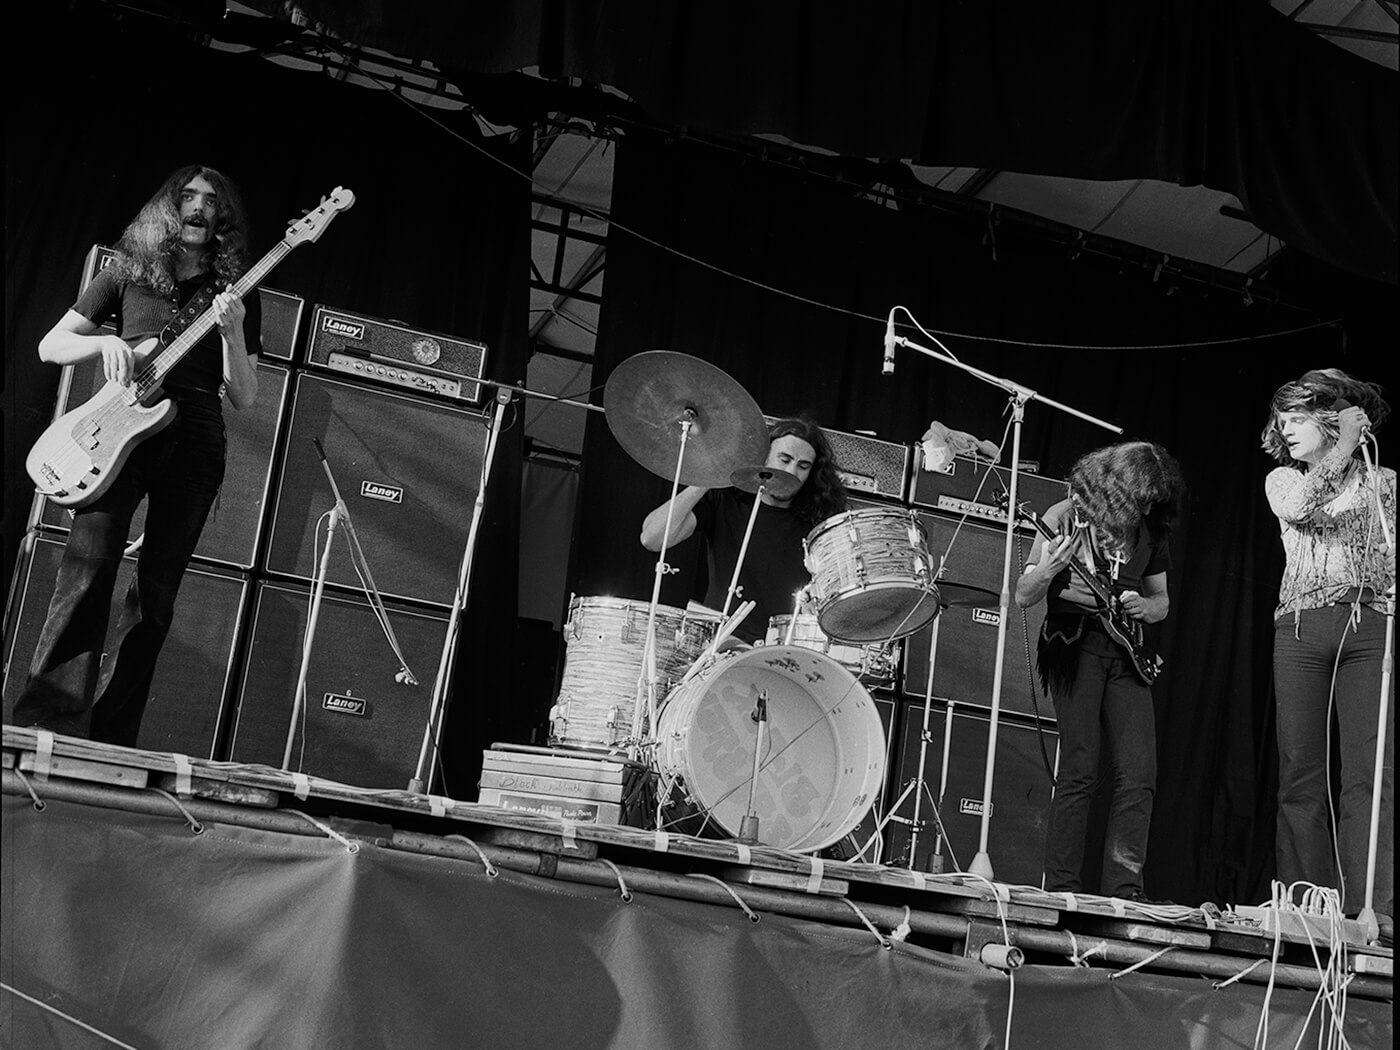 Black Sabbath performing at Plumpton festival in 1970. Laney amplifiers are used, photo by Michael Putland/Getty Images